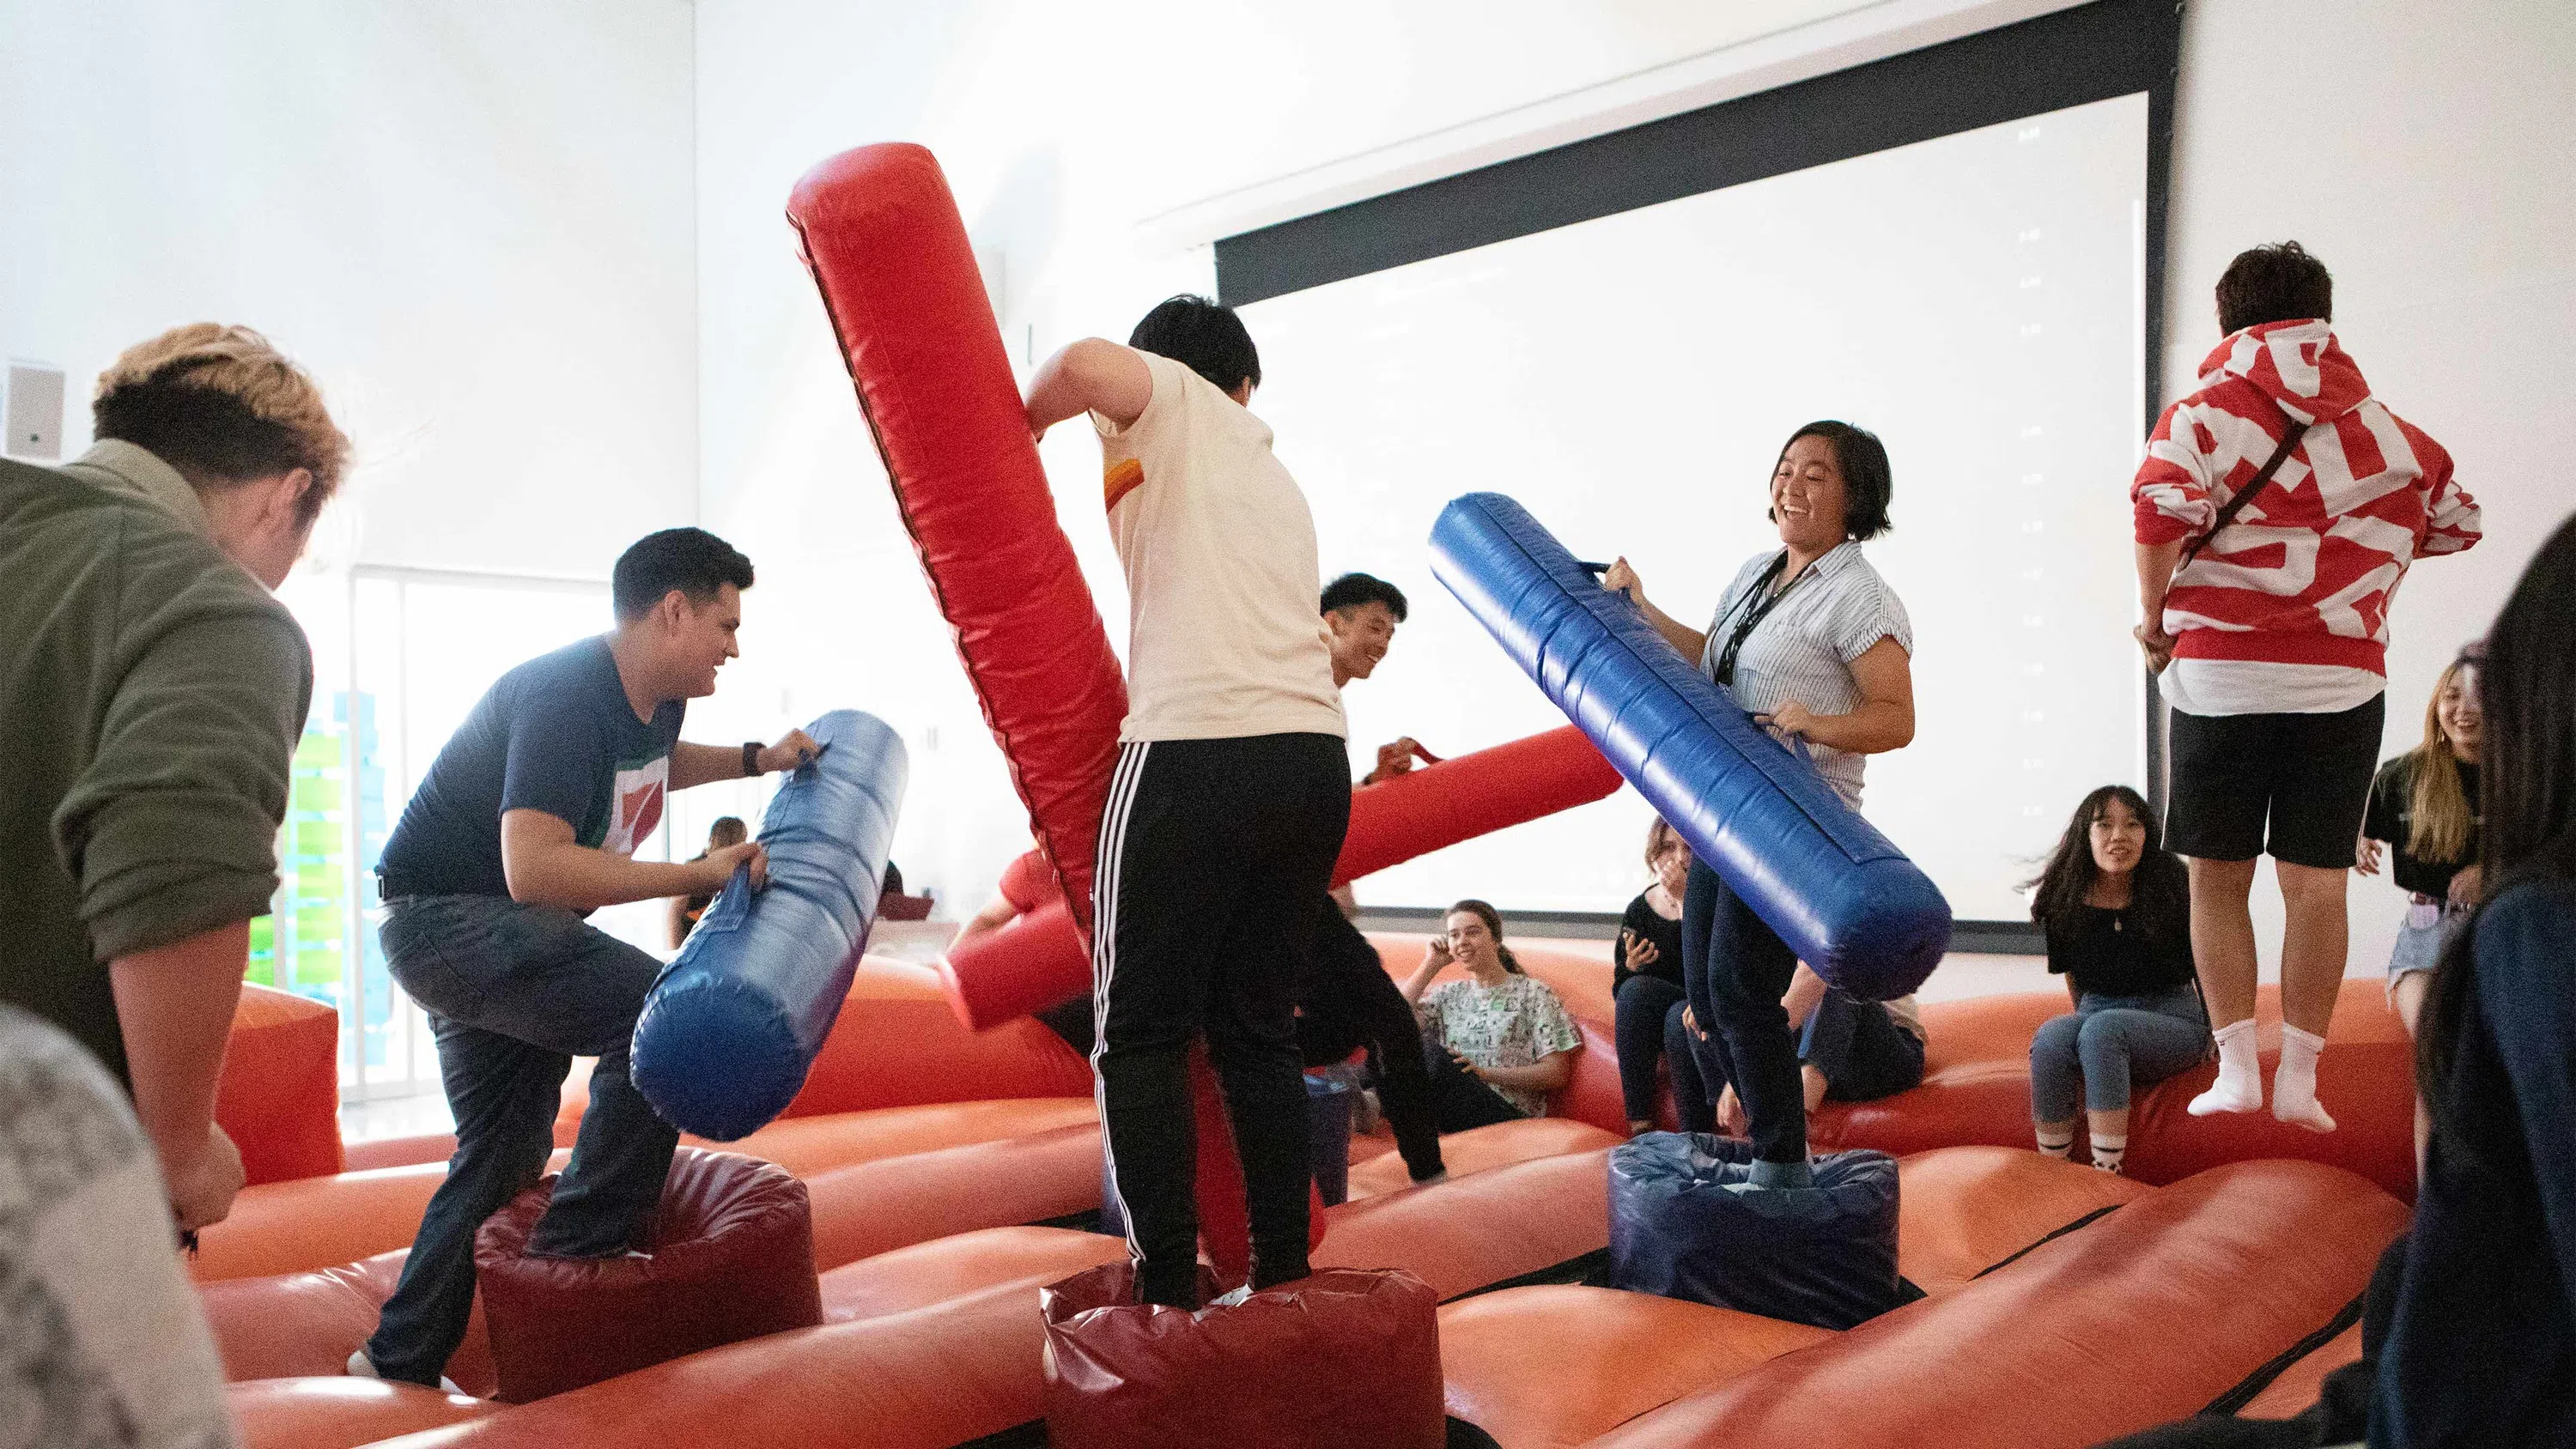 A dozen students play in an inflatable bounce house.